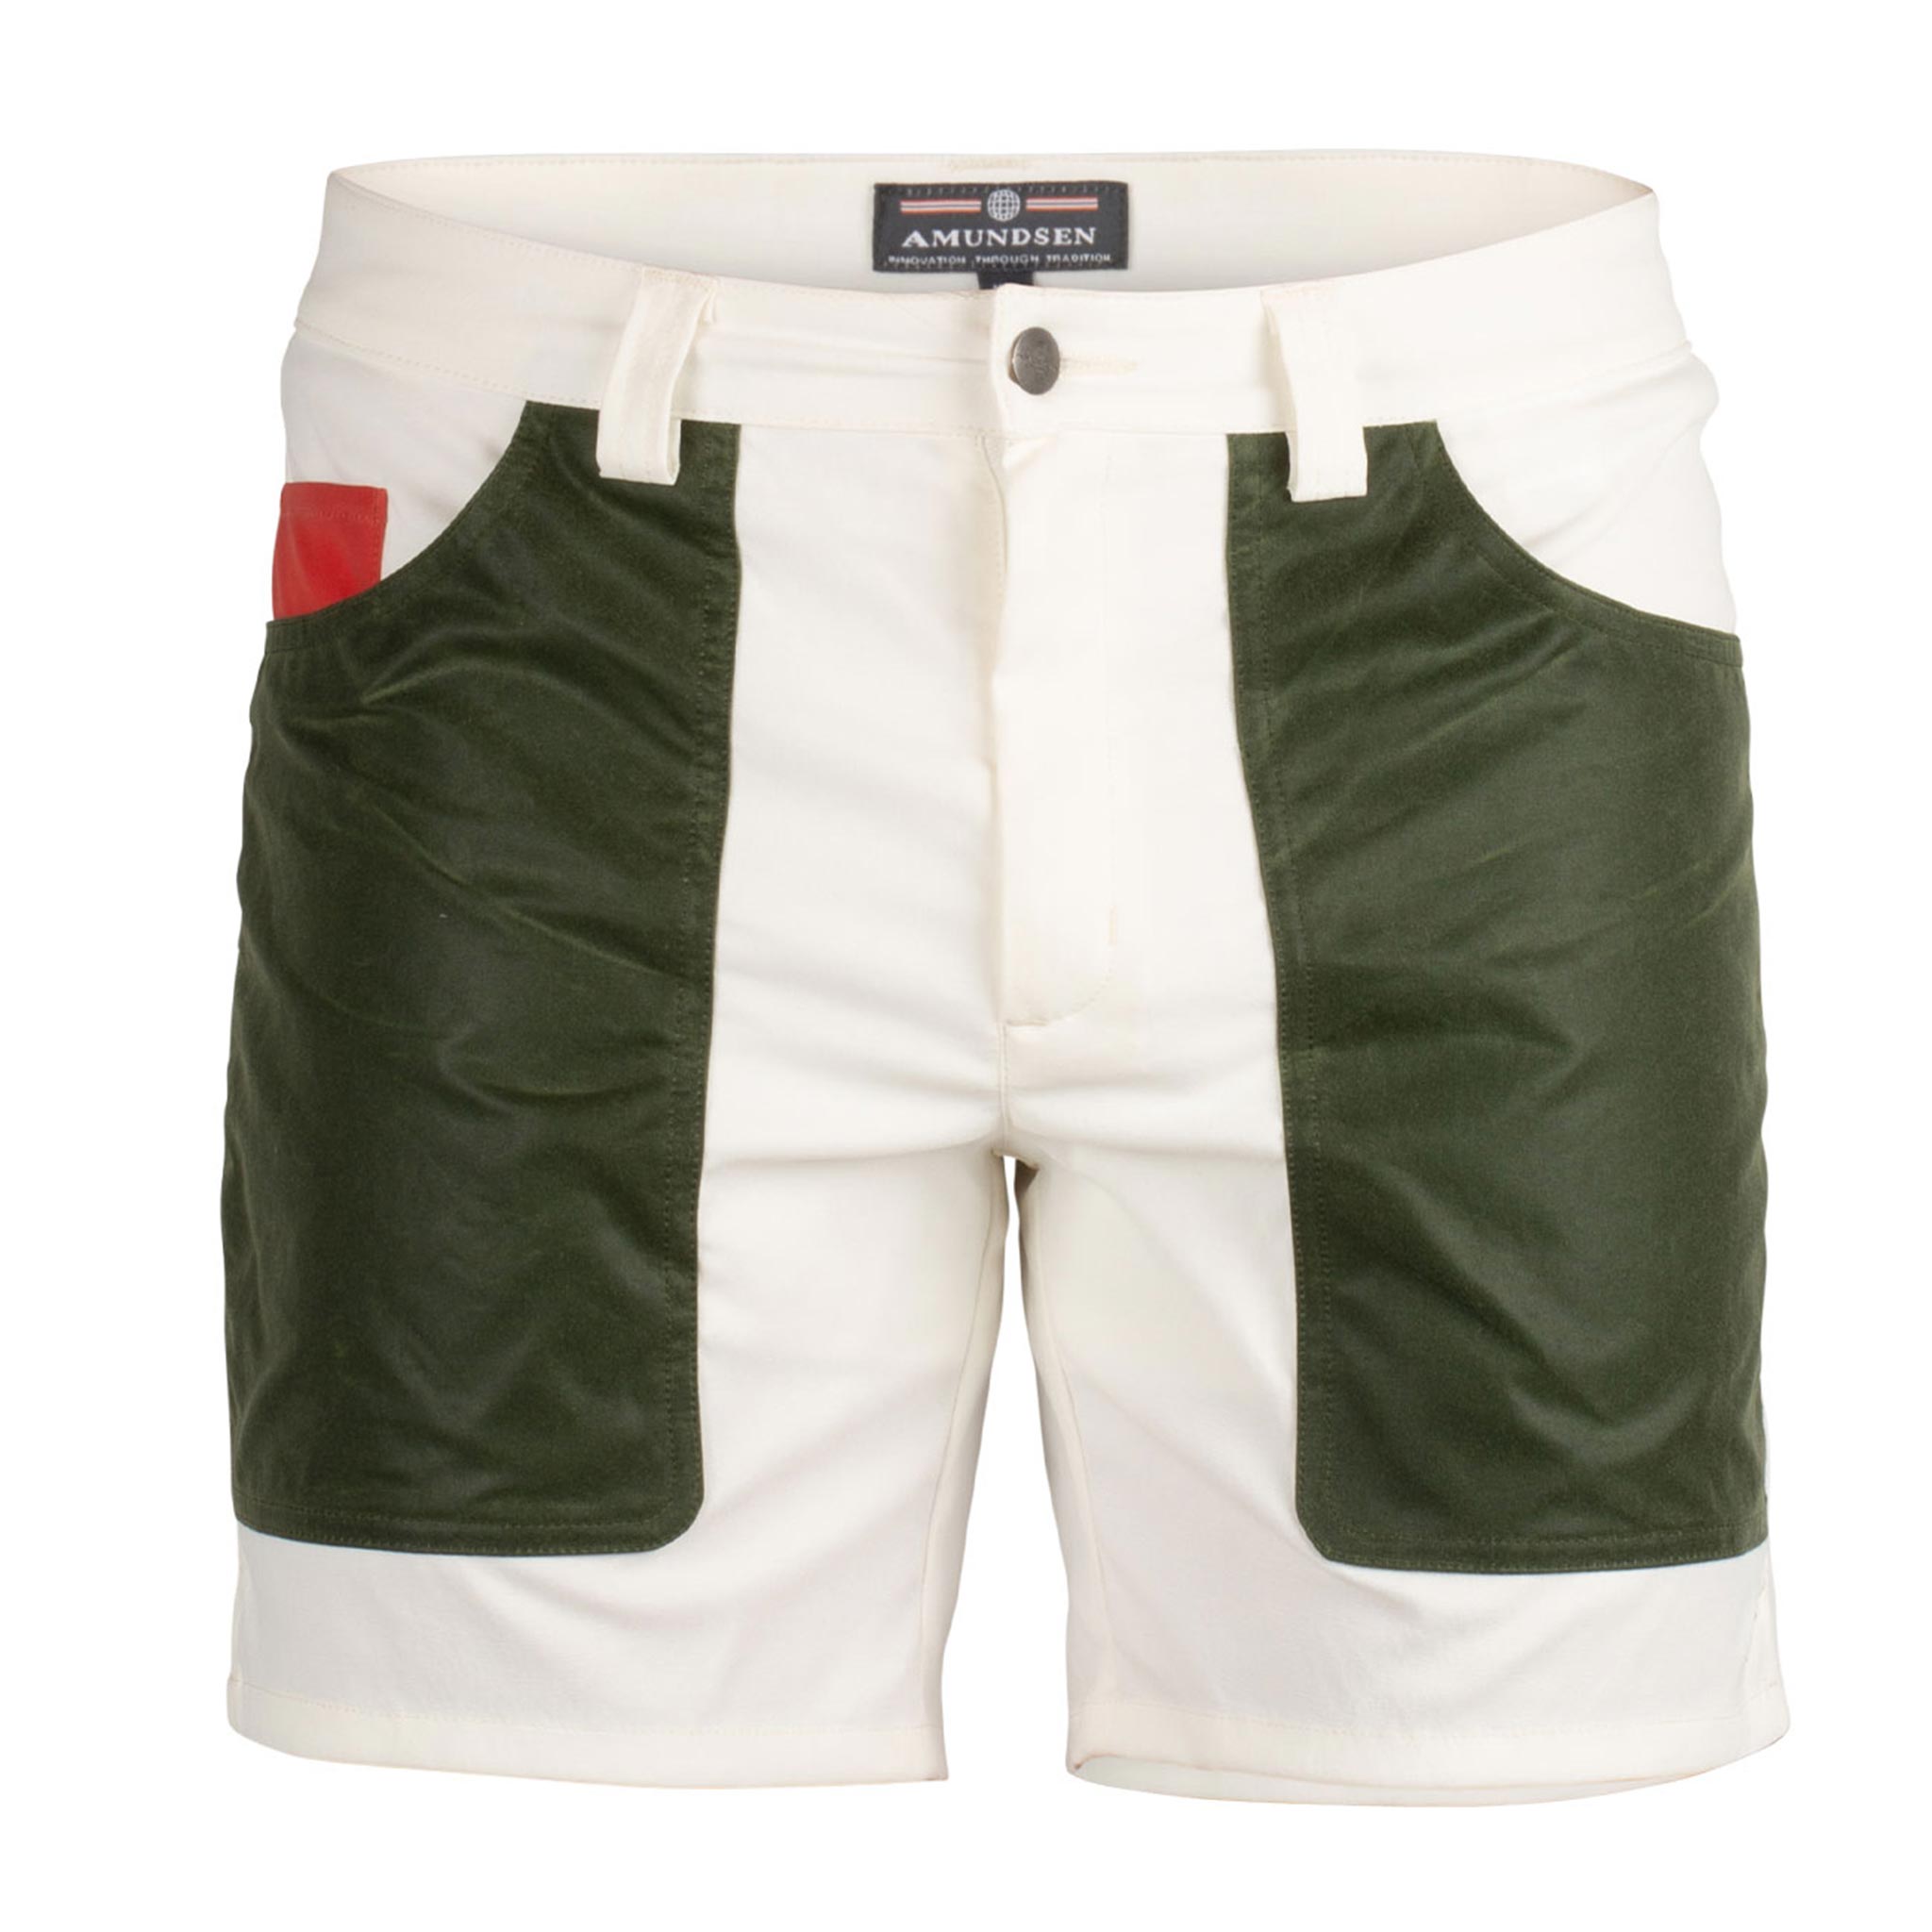 Field Shorts in Off White/Green